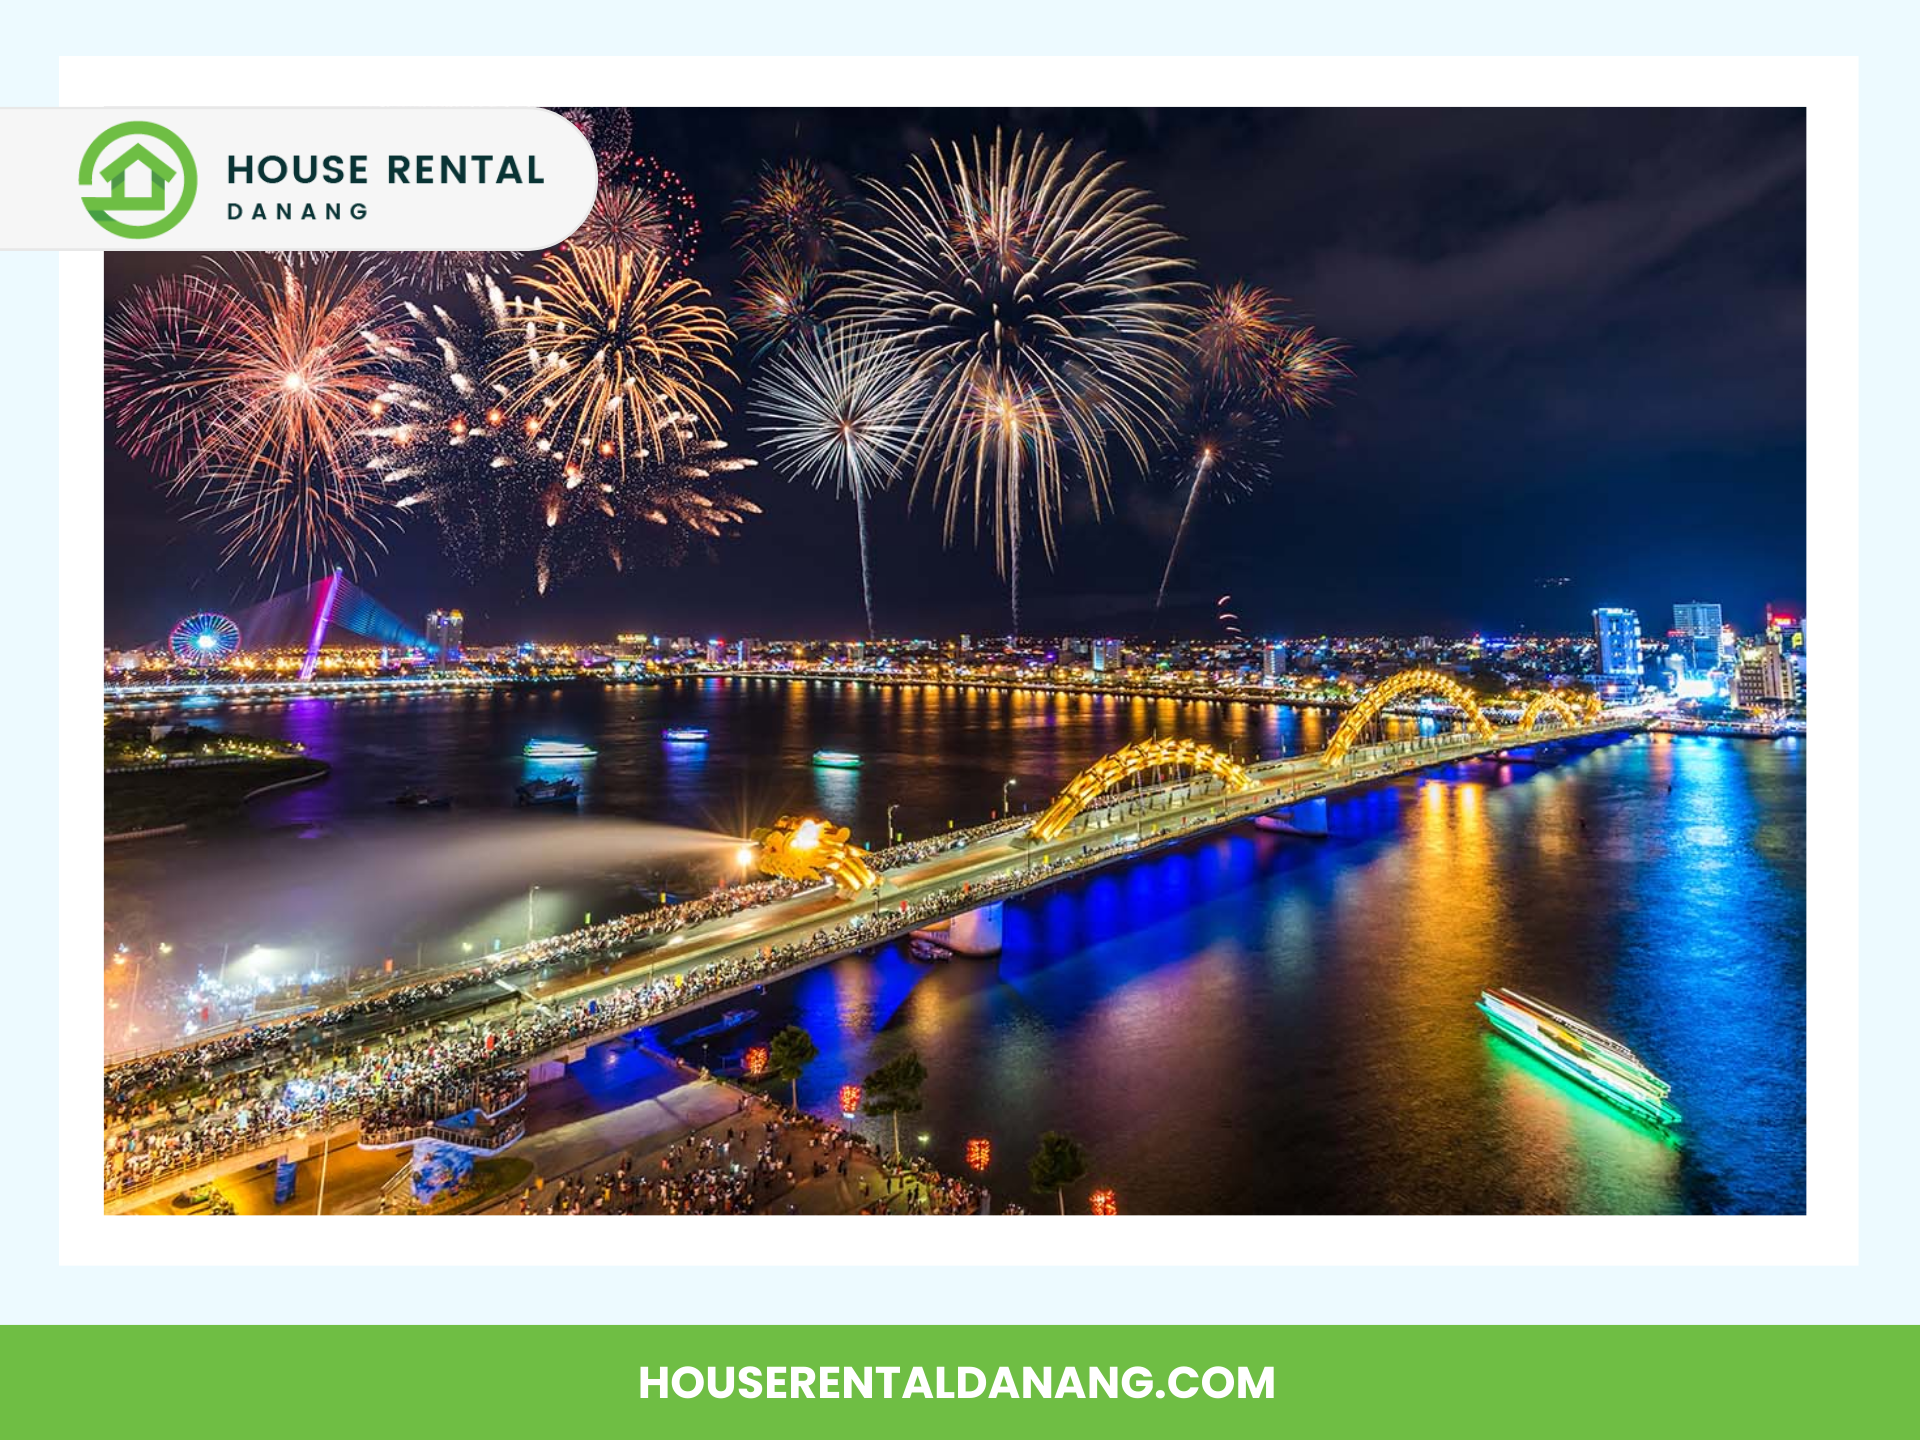 A vibrant night scene with fireworks over a brightly lit city and river. A bridge spans the river, and a green-lit boat is moving on the water near the iconic Dragon Bridge in Da Nang. The text reads "House Rental Danang" and "houserentaldanang.com.